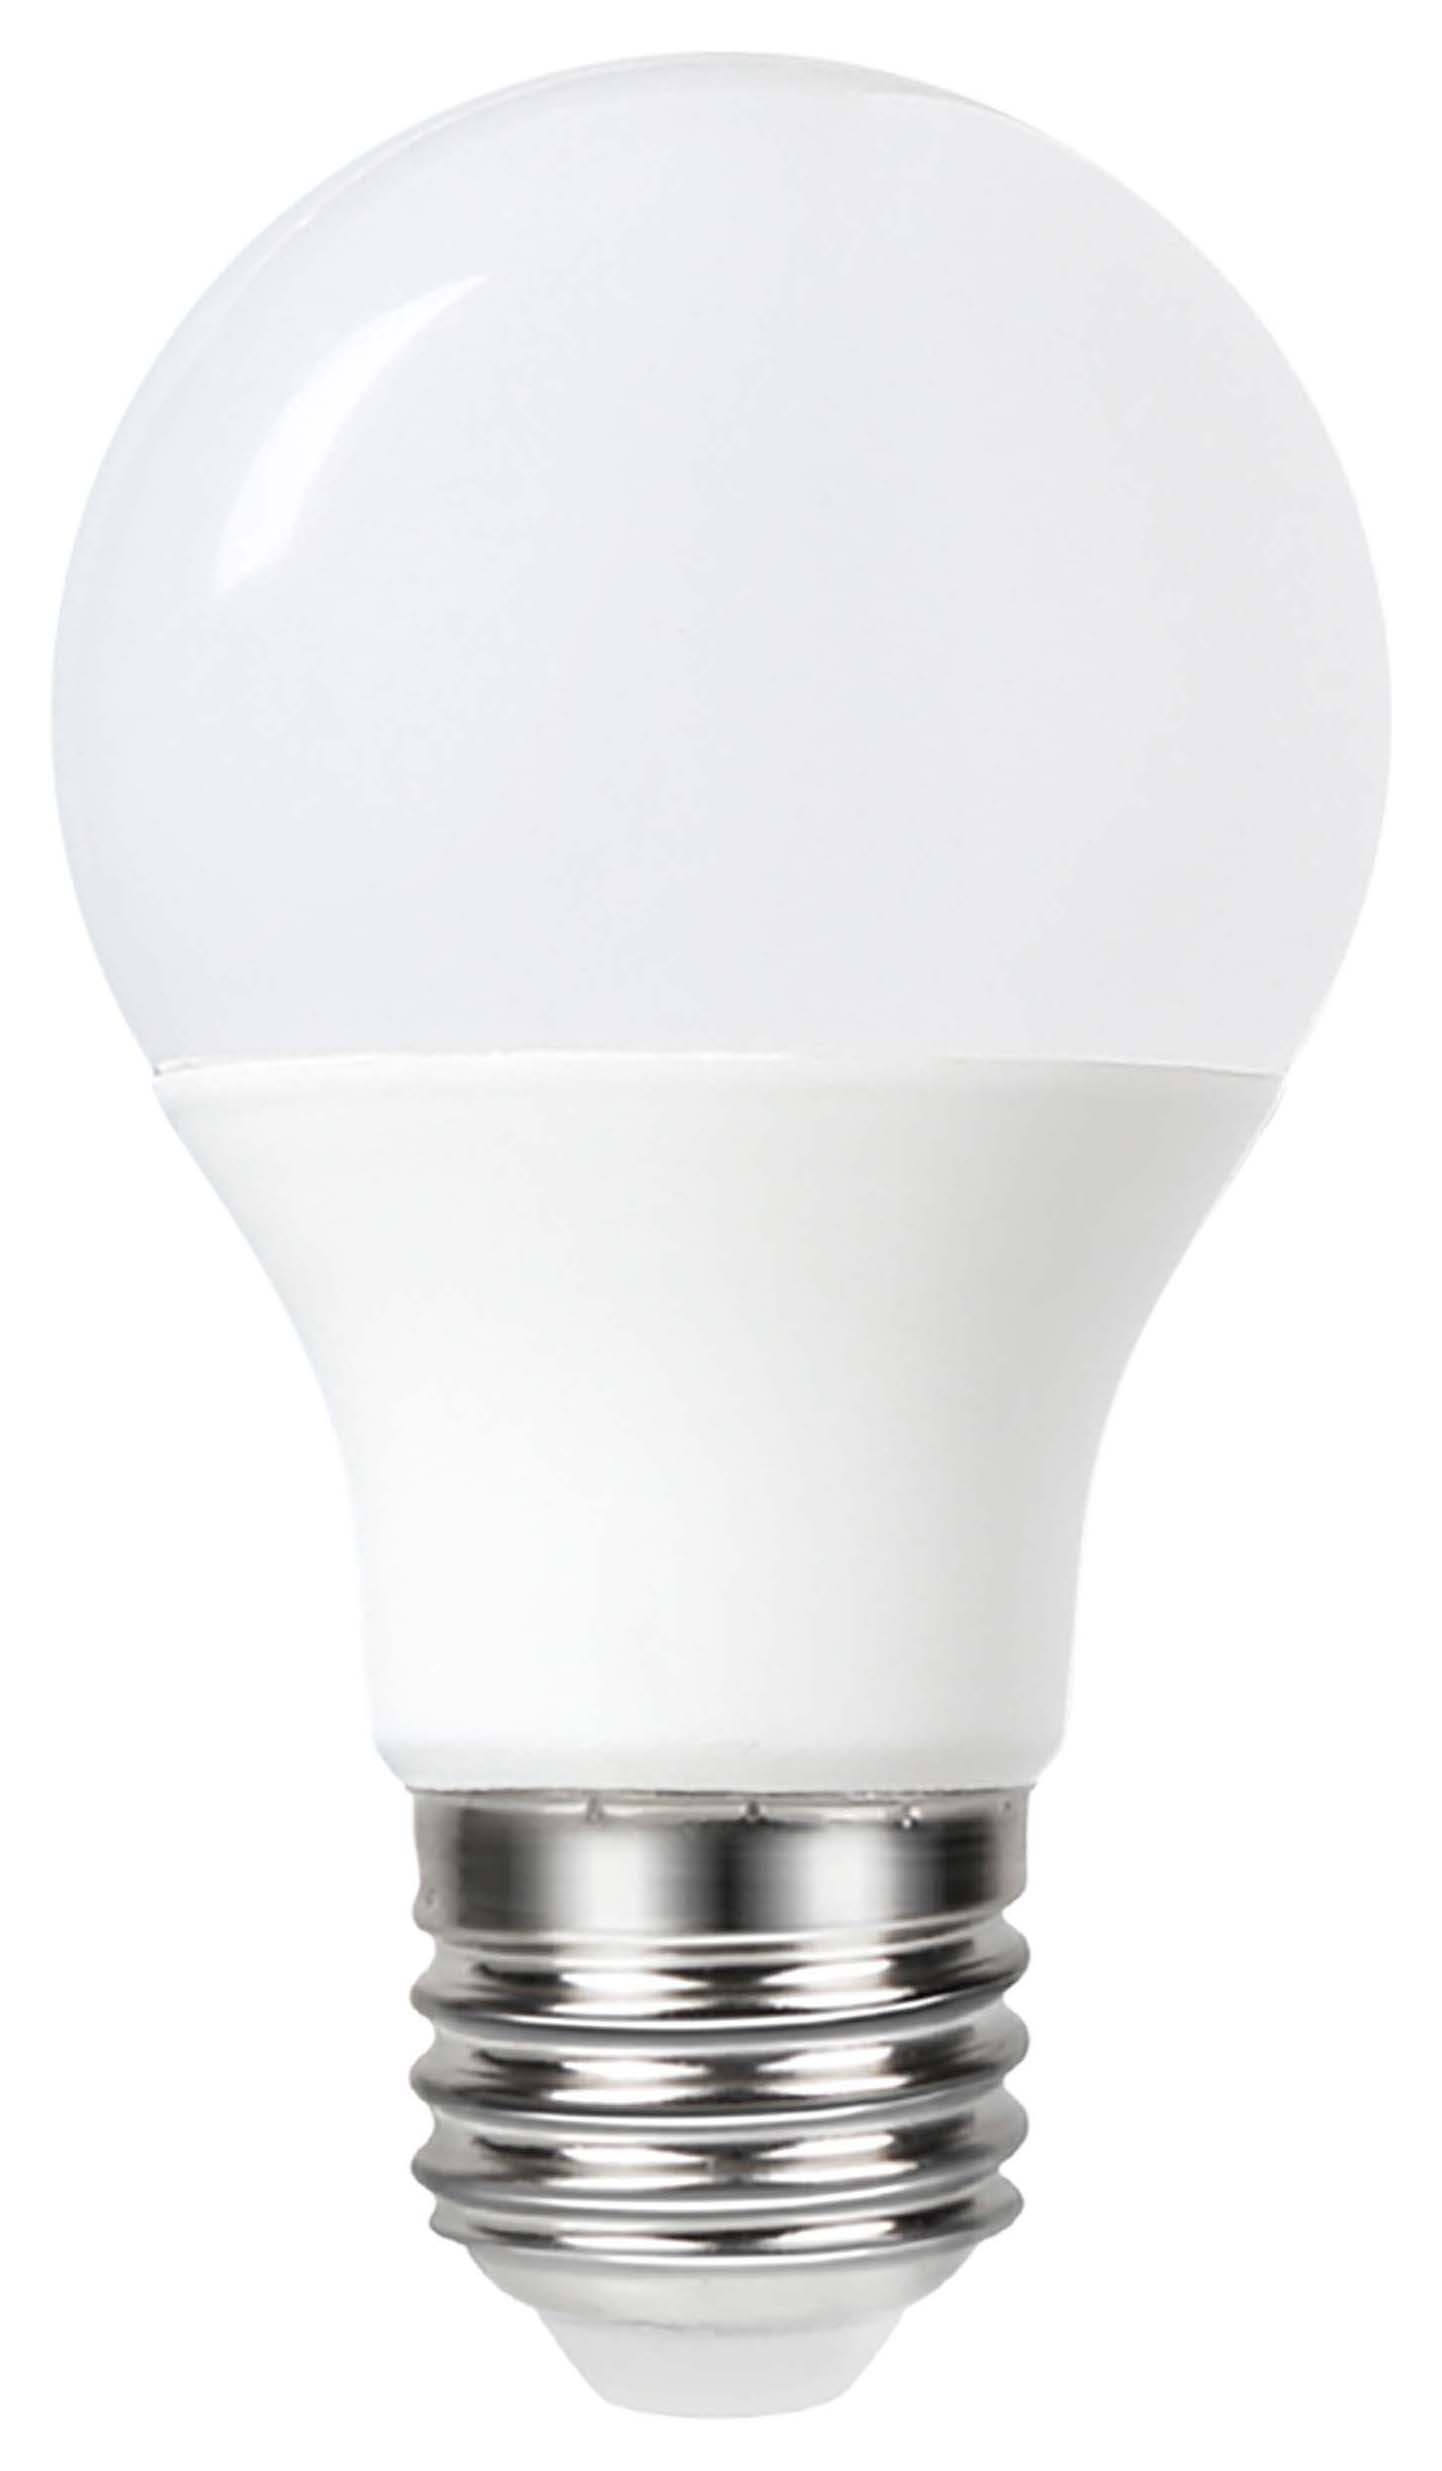 Wickes Non-Dimmable GLS Opal LED E27 4.8W Warm White Light Bulb